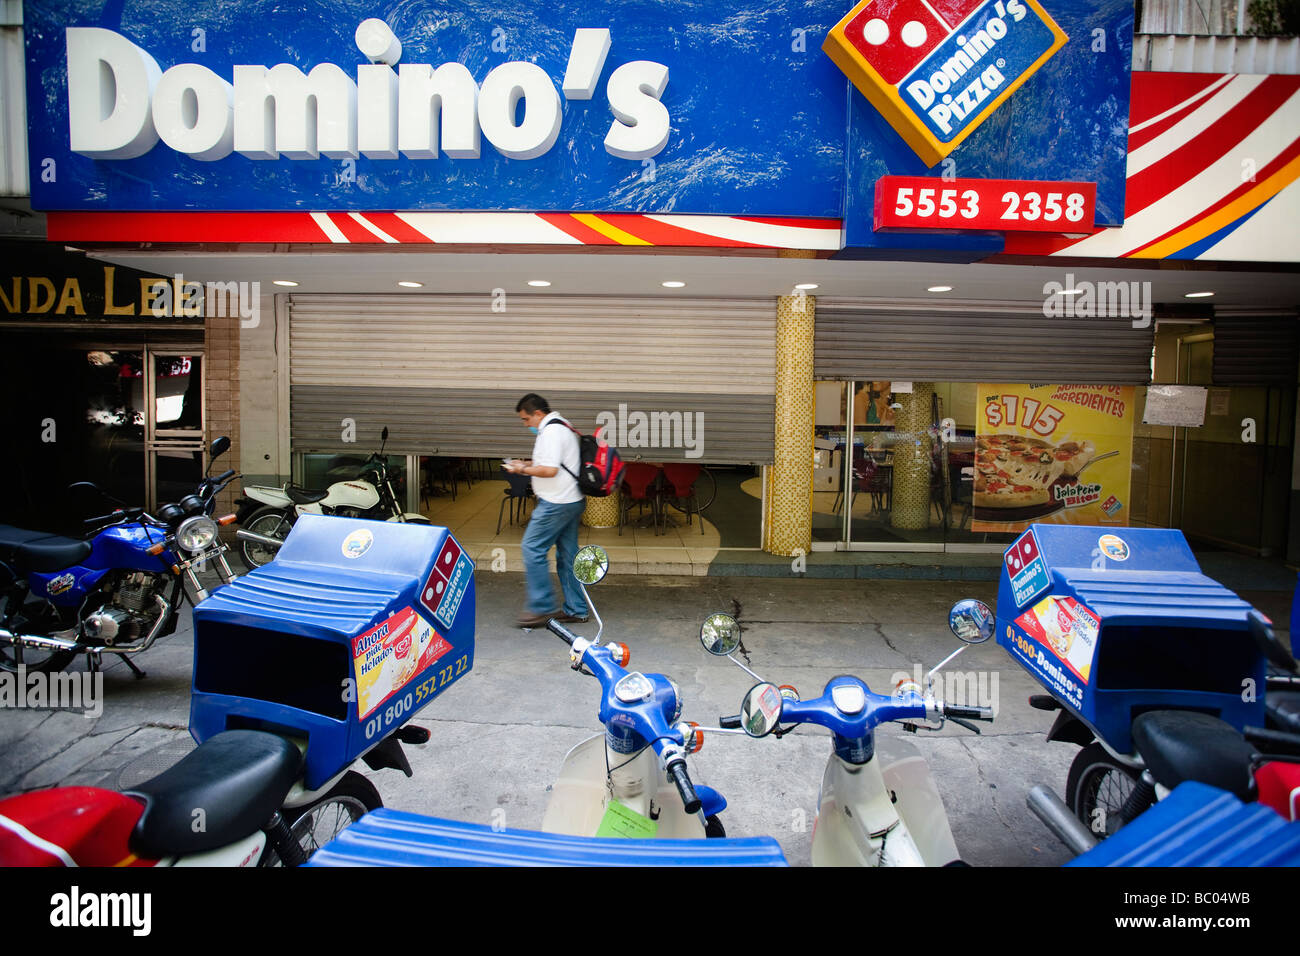 A man walks in the street between some parked motorcycles and a closed pizza restaurant in Mexico City, DF, Mexico. Stock Photo